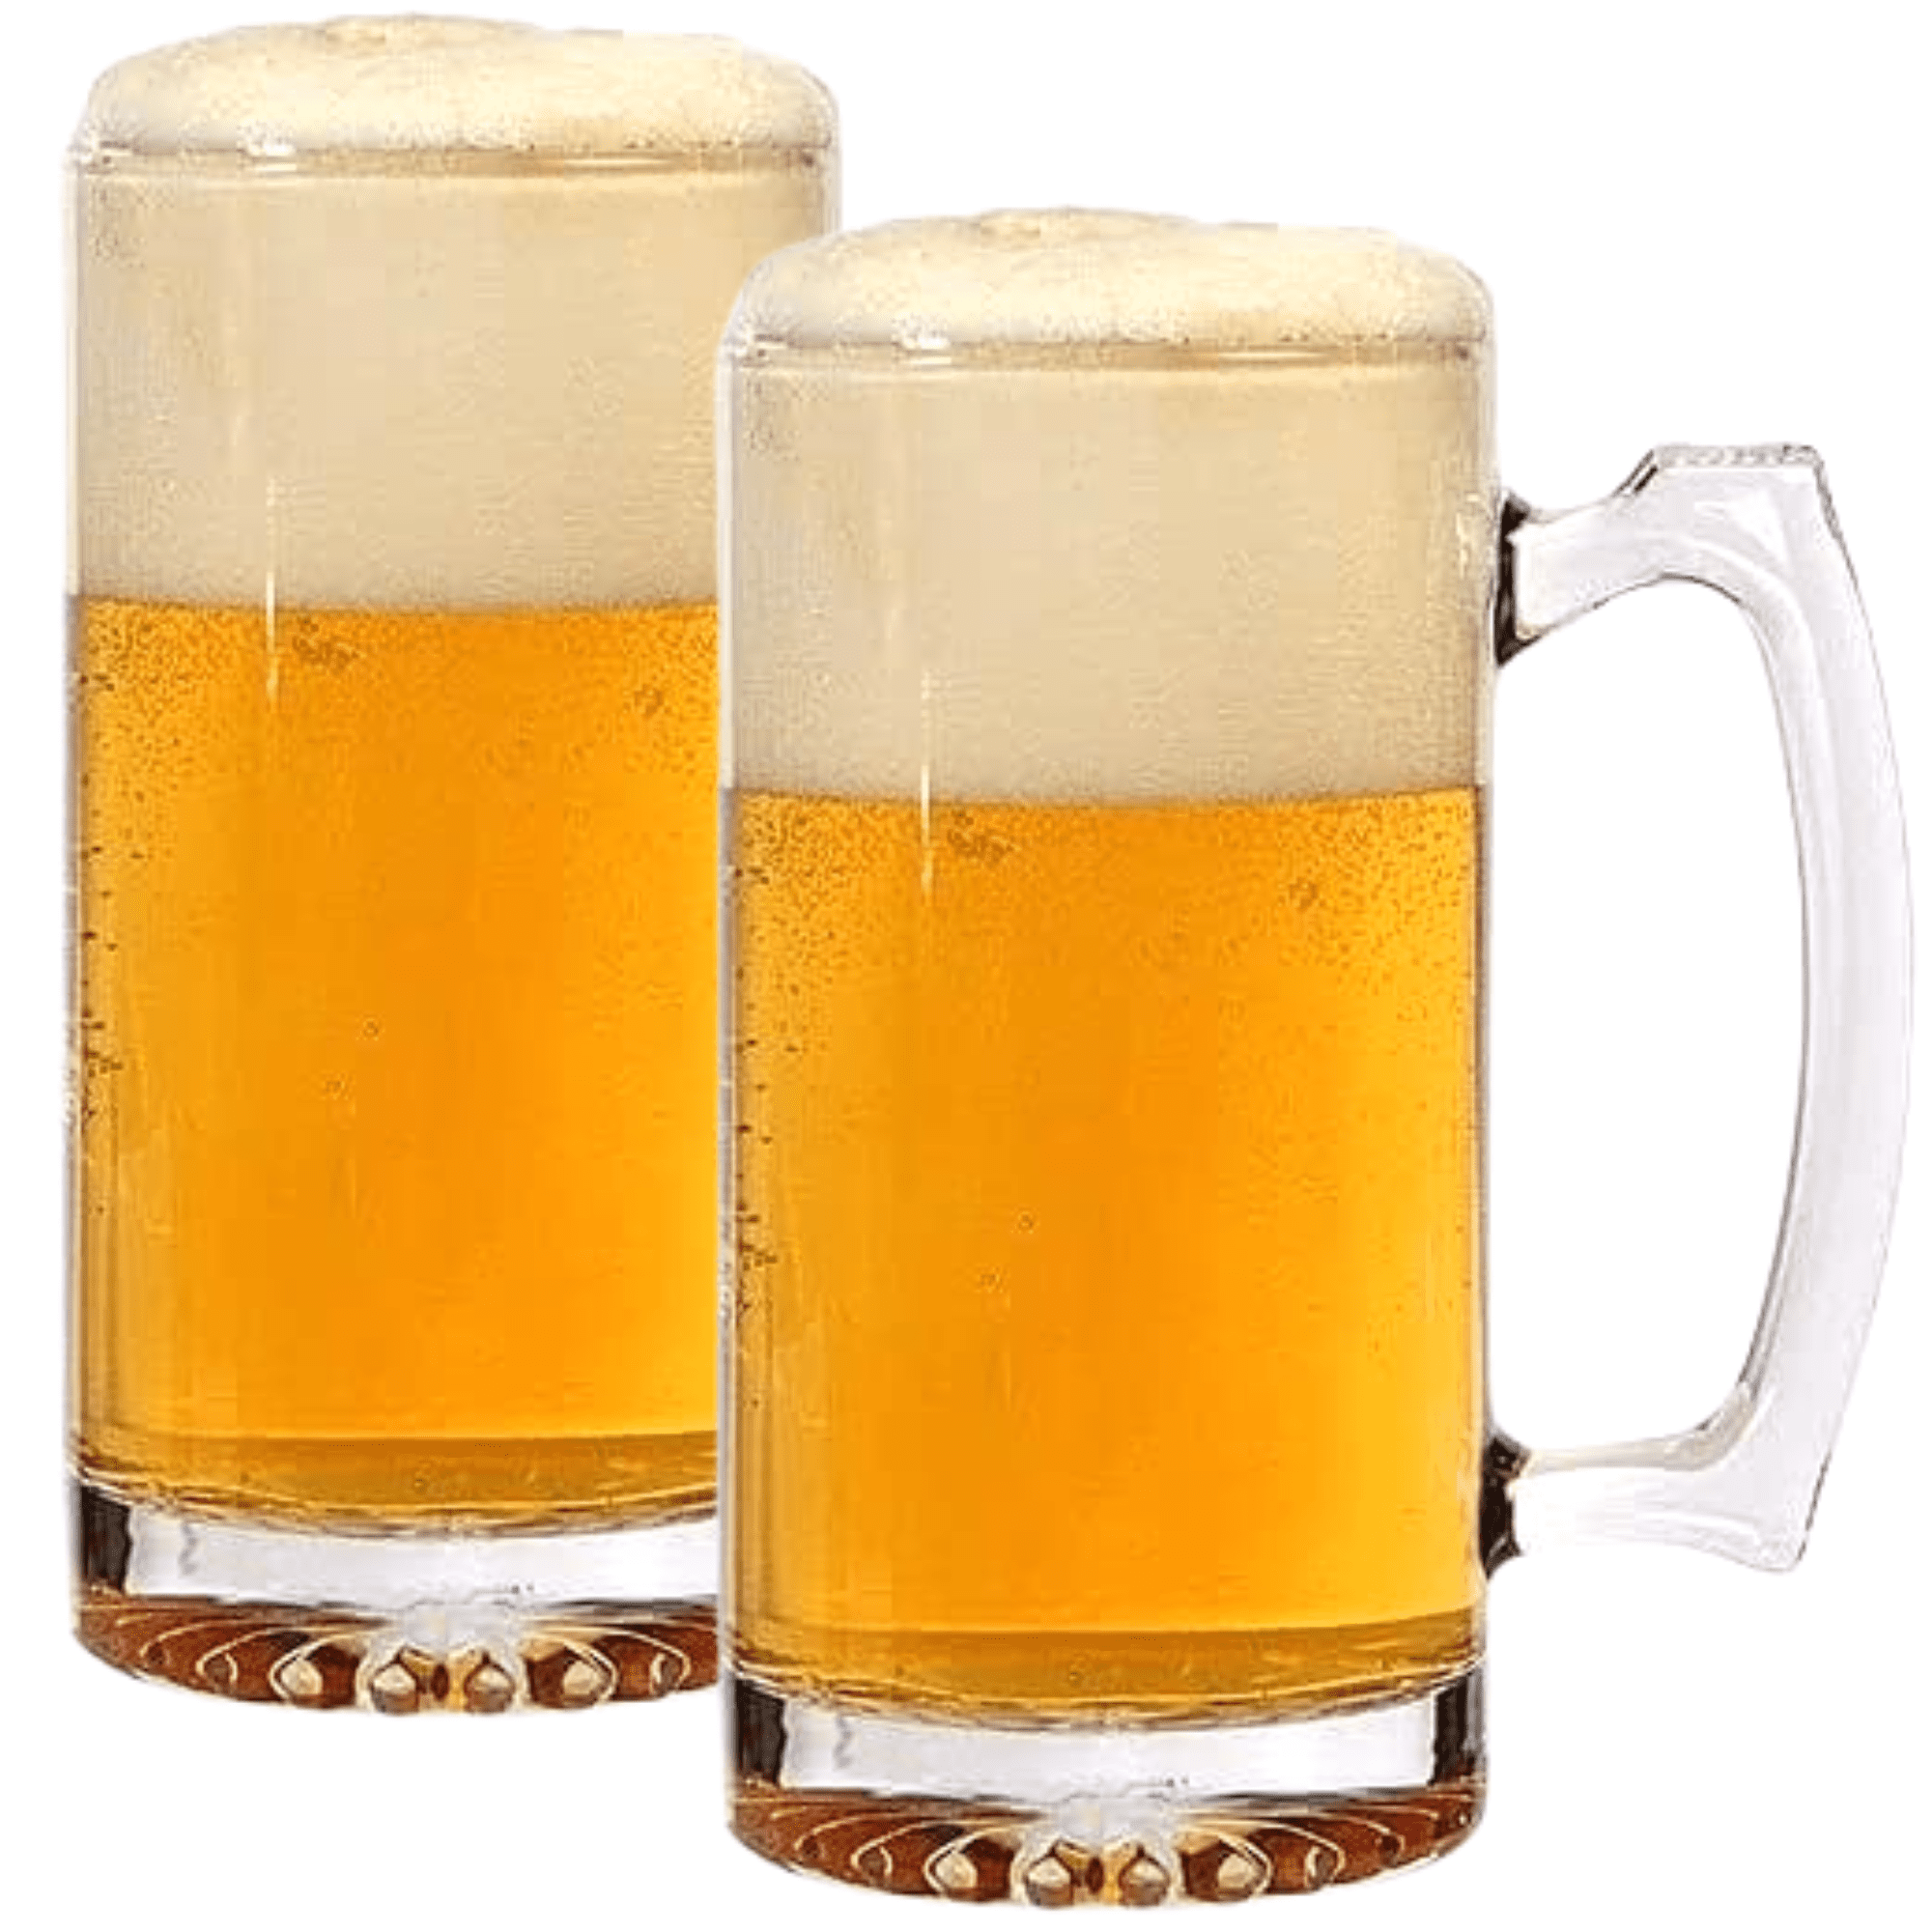 Beer Glass Can Shaped 16 oz - Pint Beer Glasses 4 Pack w/coasters